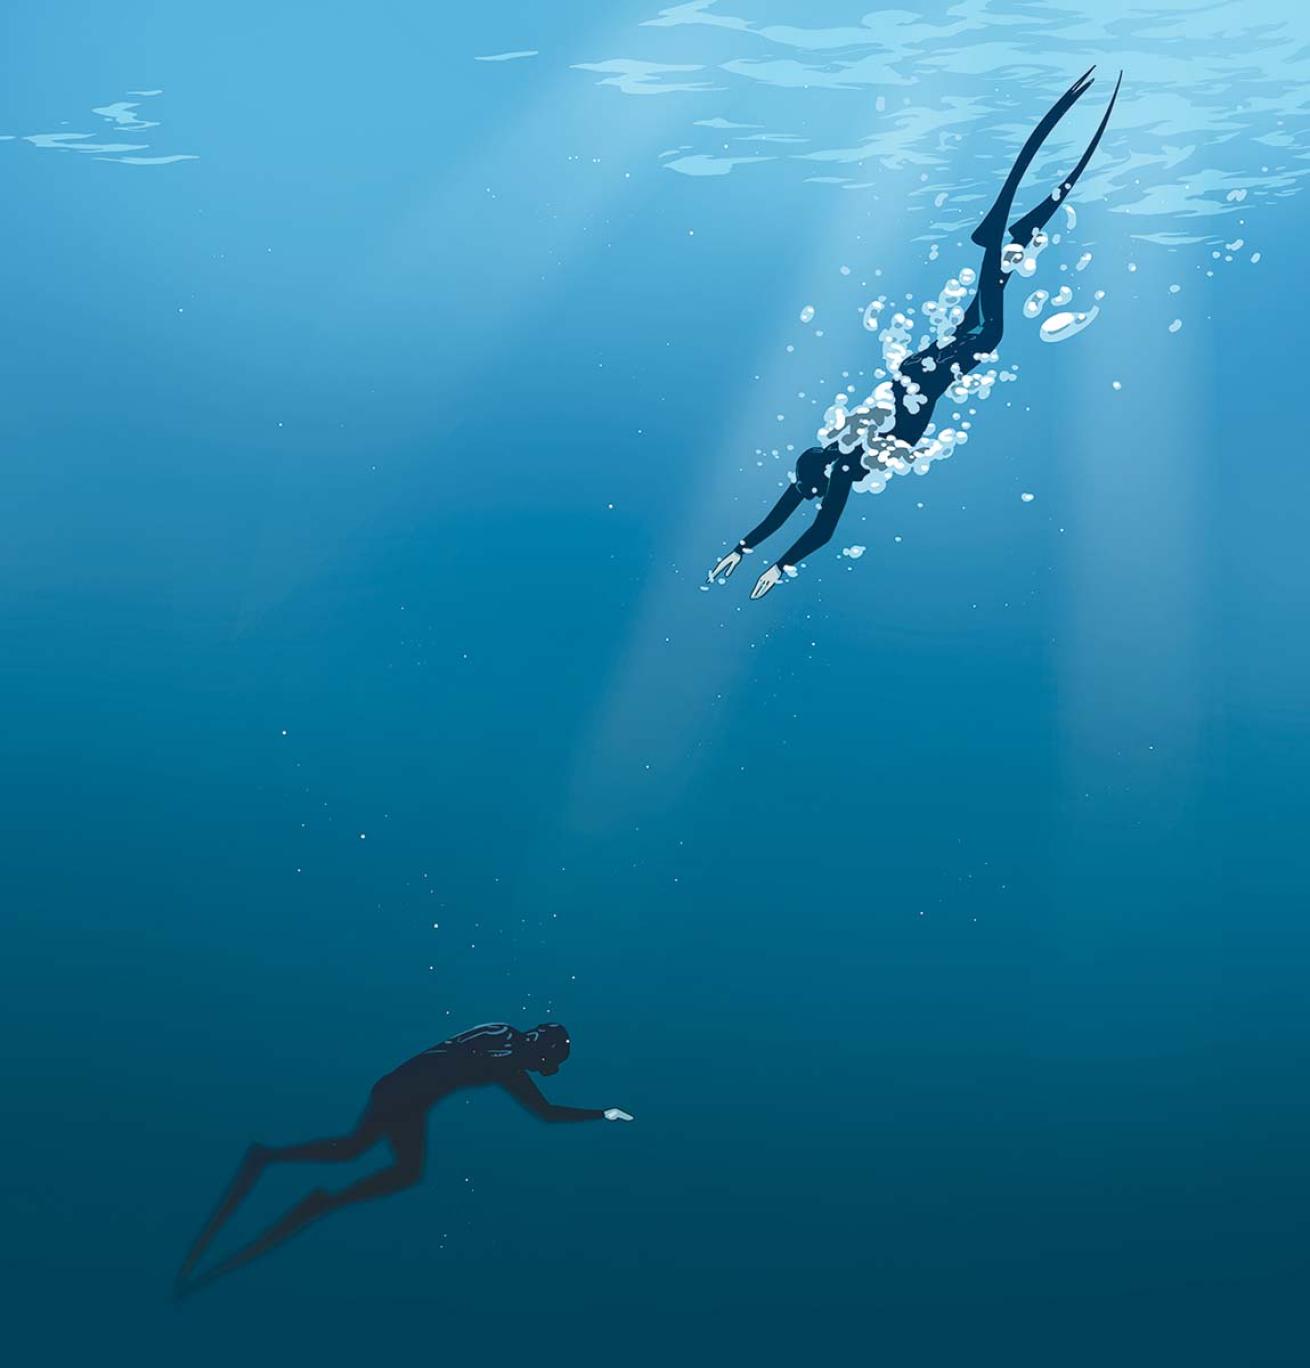 Freediver helping blacked out freediver illustration